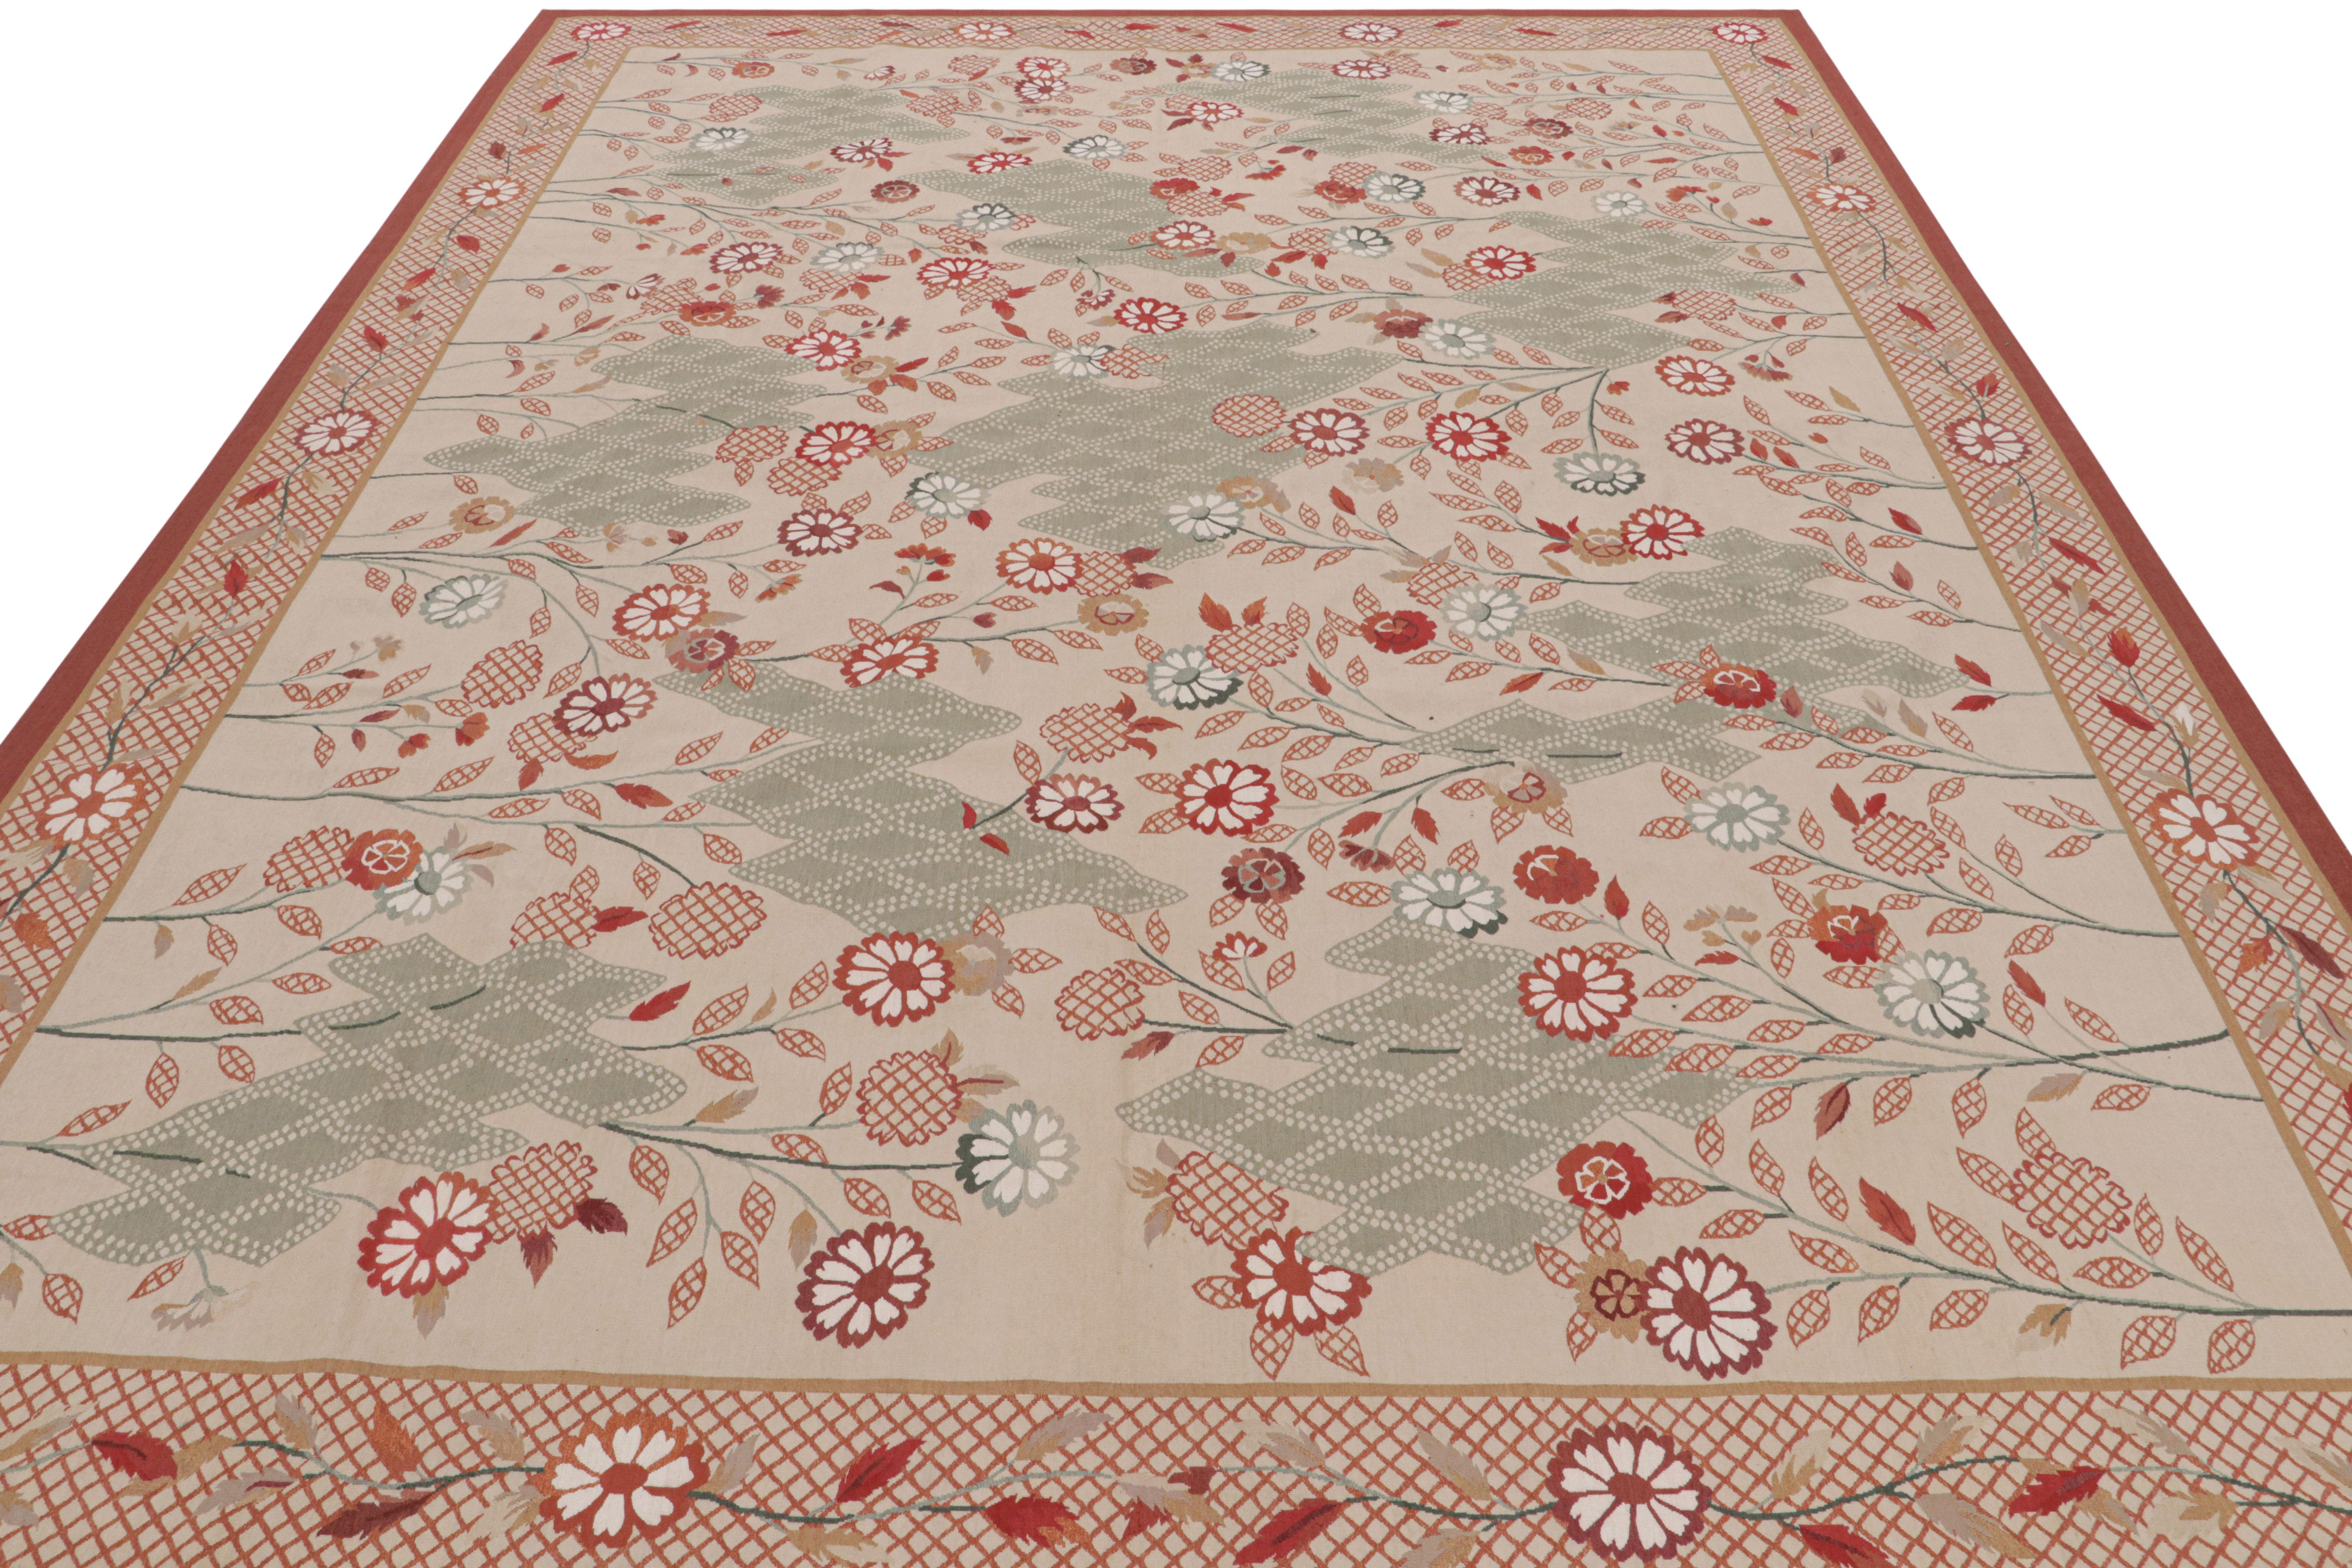 Antique Aubusson Rug with Beige-Brown, Green and Red Florals, from Rug & Kilim In New Condition For Sale In Long Island City, NY